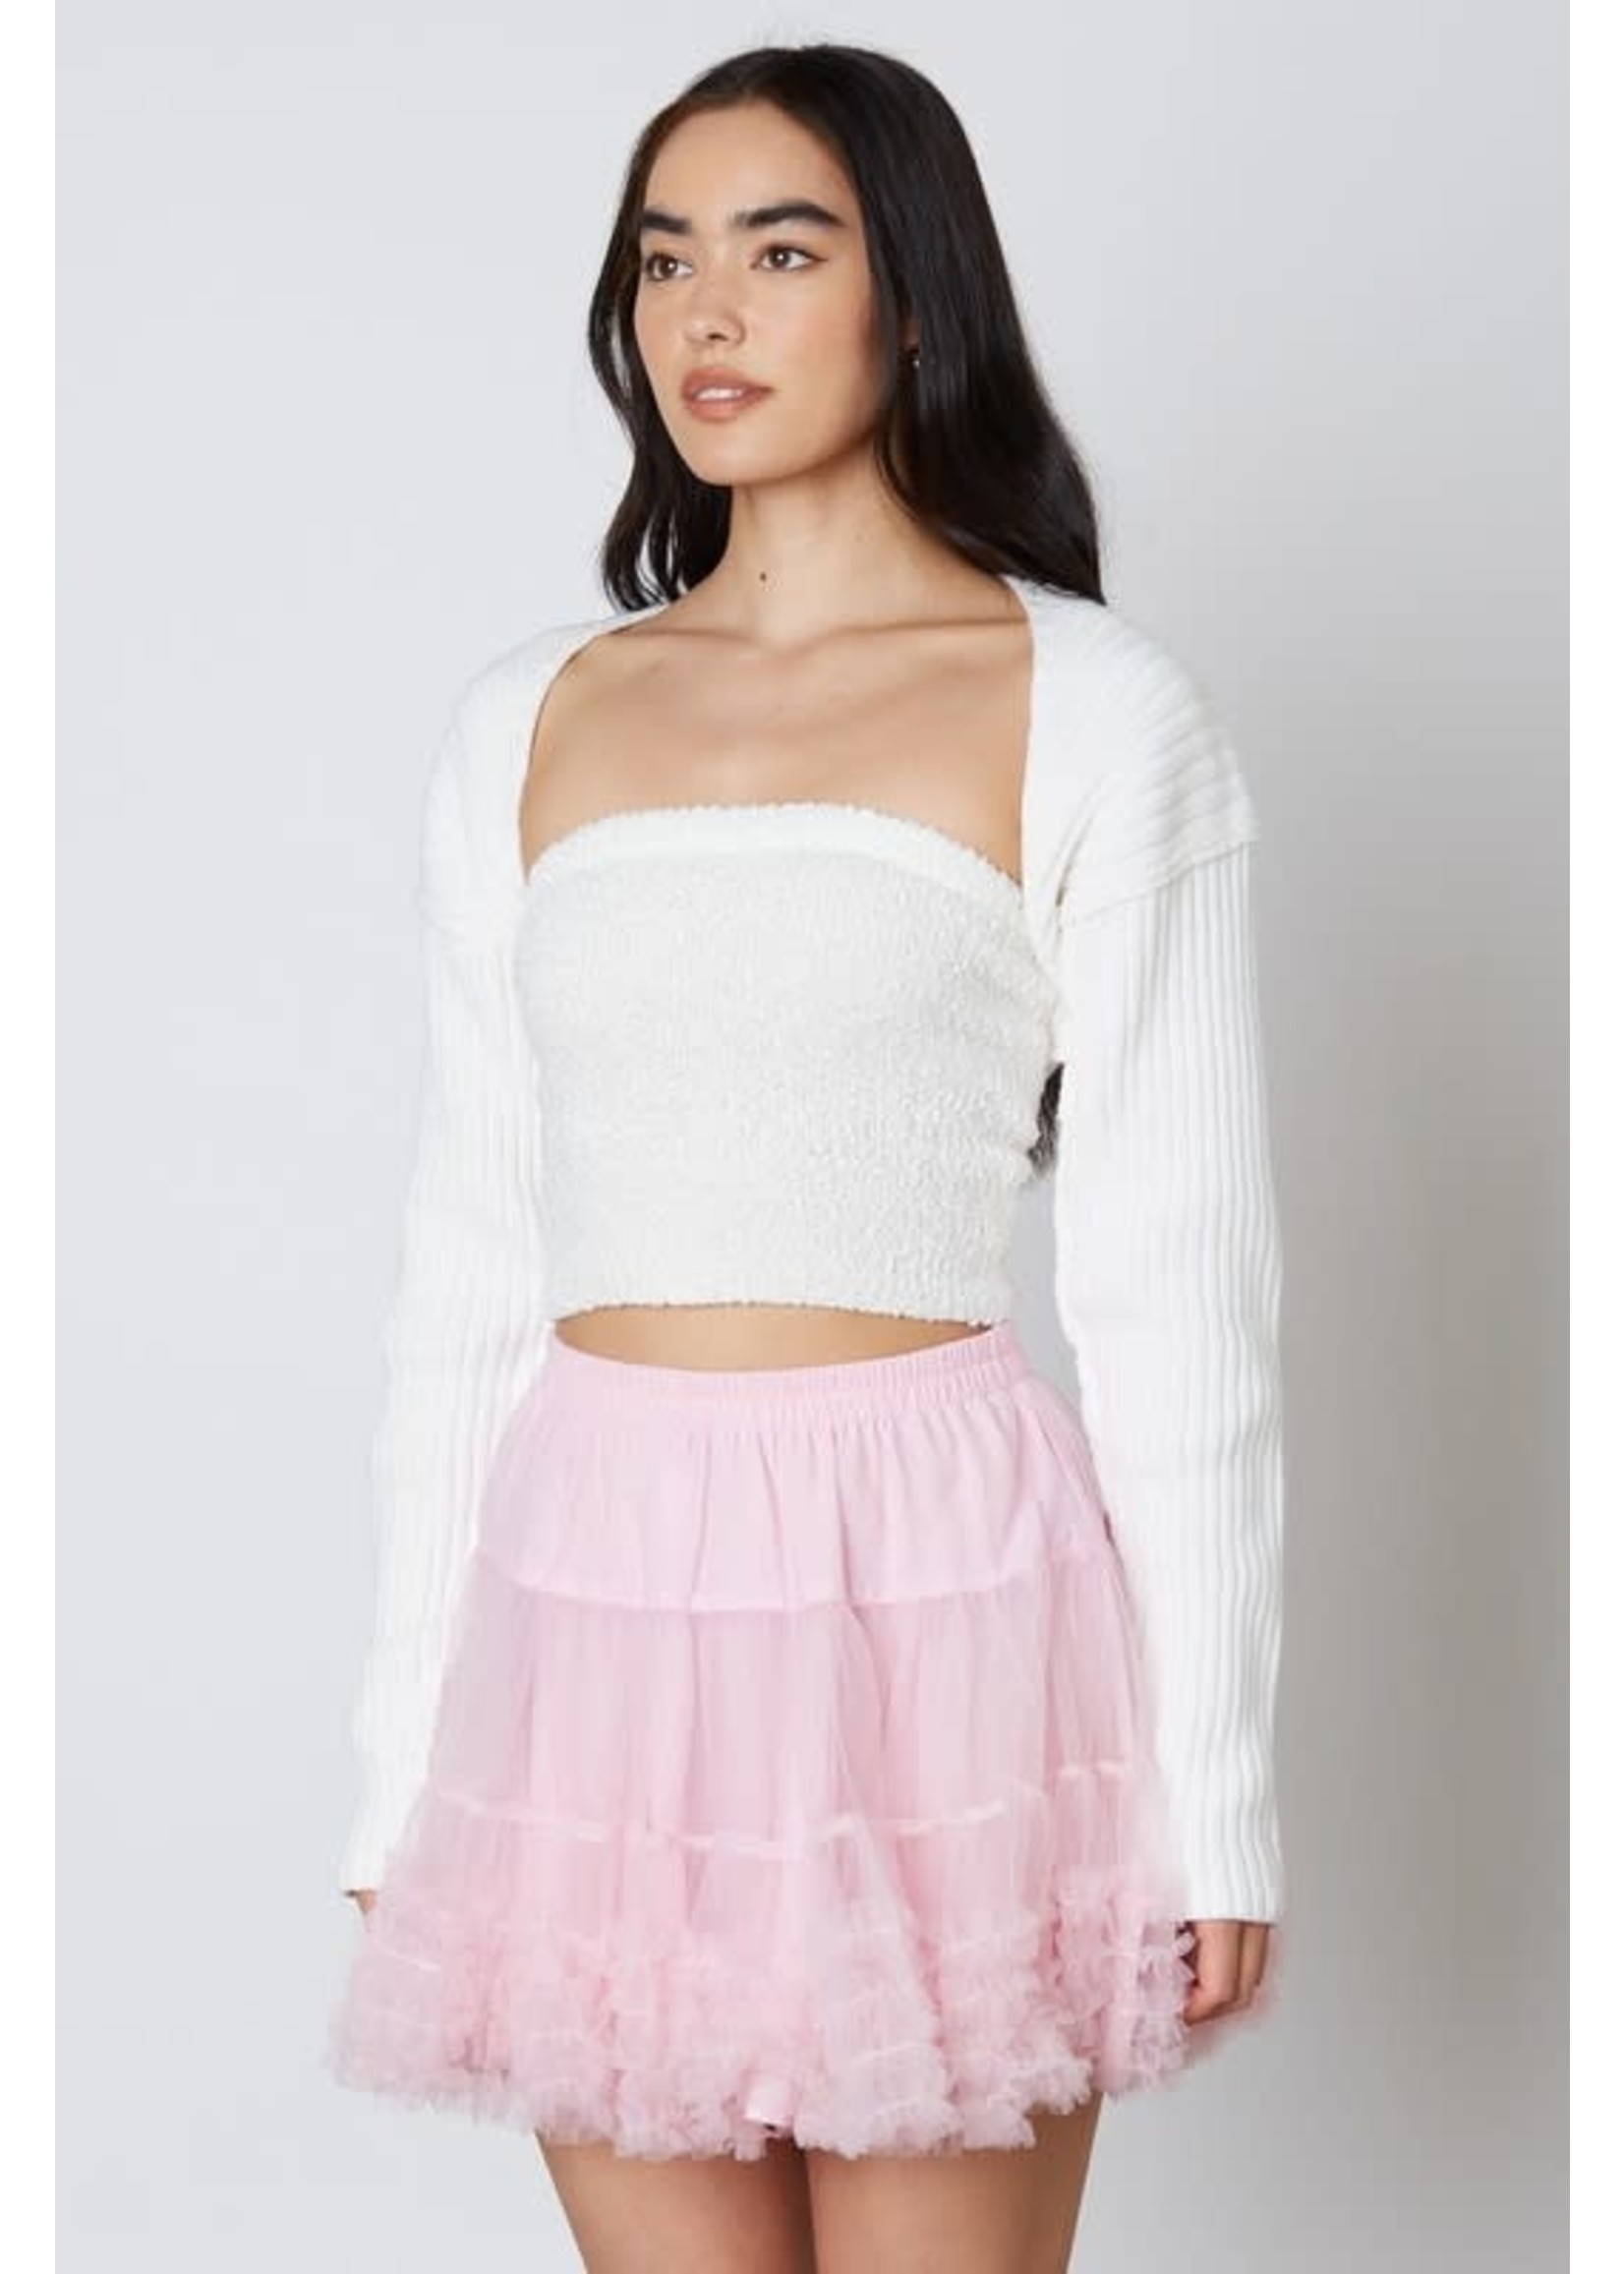 Cotton Candy LA FINAL SALE From$44 to $24-12009